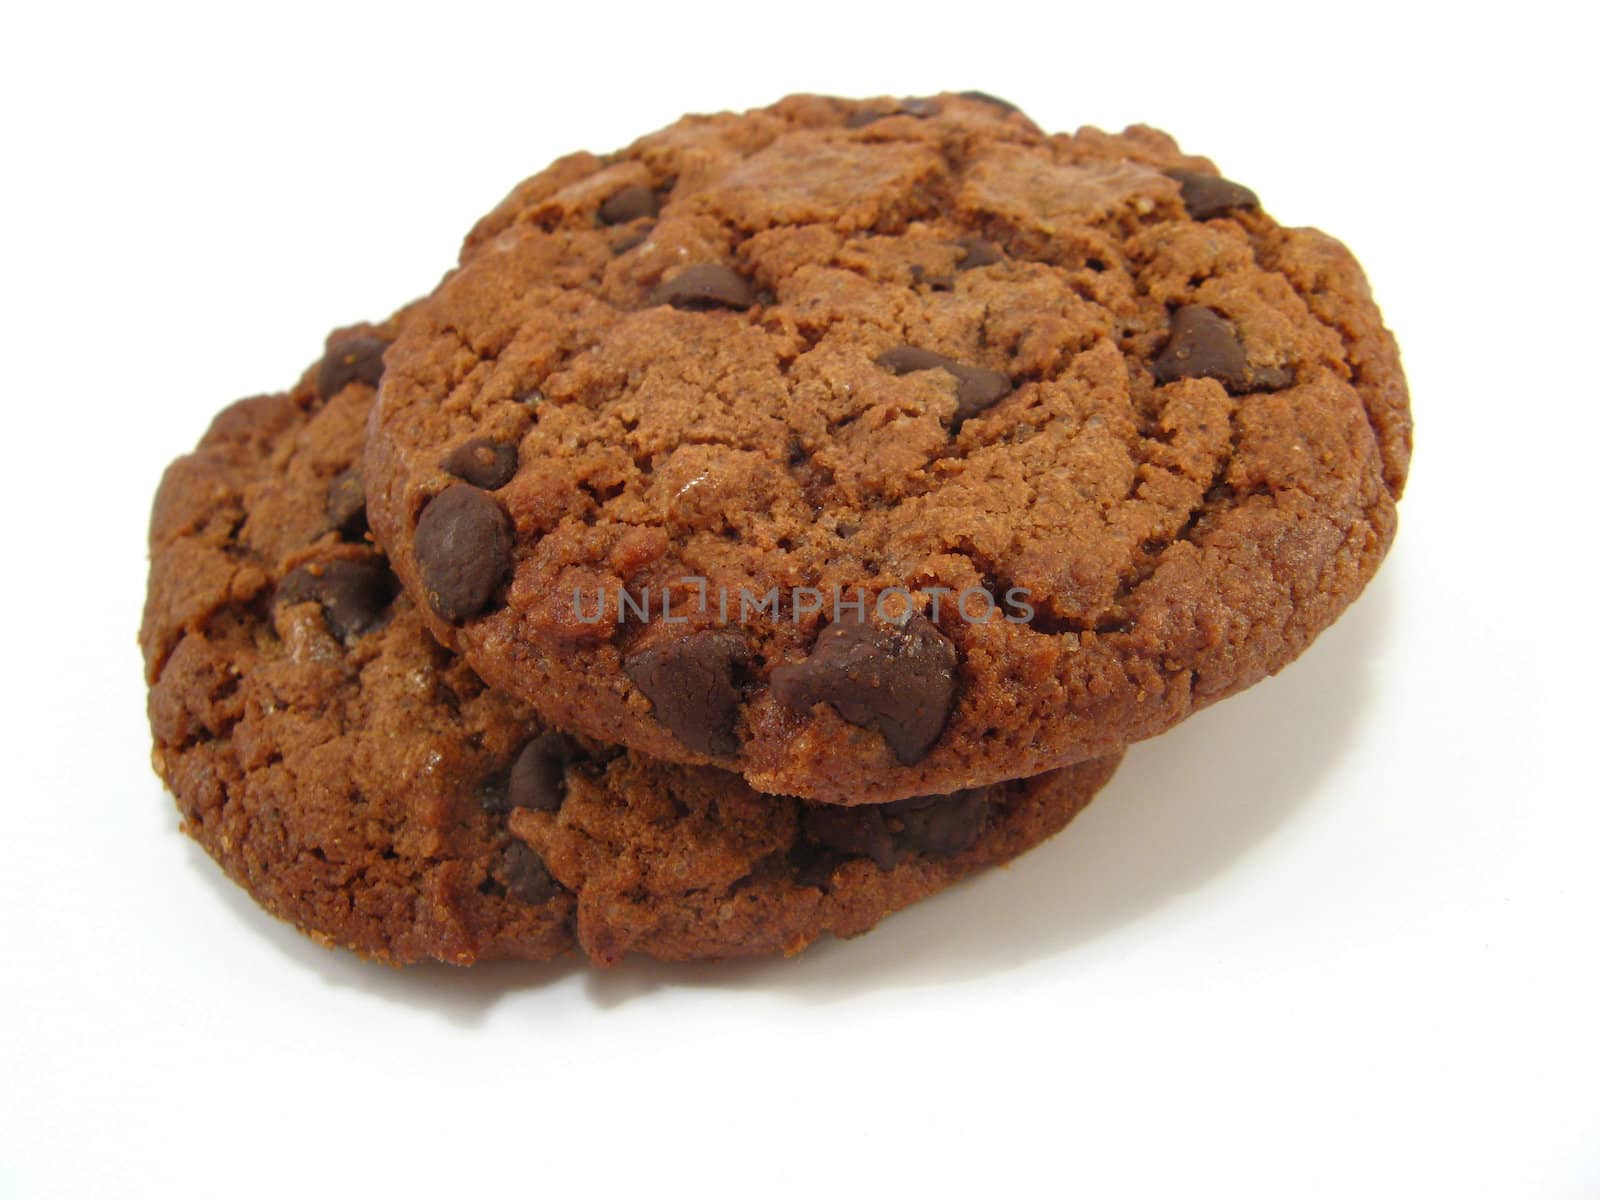 some chocolate cookies over a white background